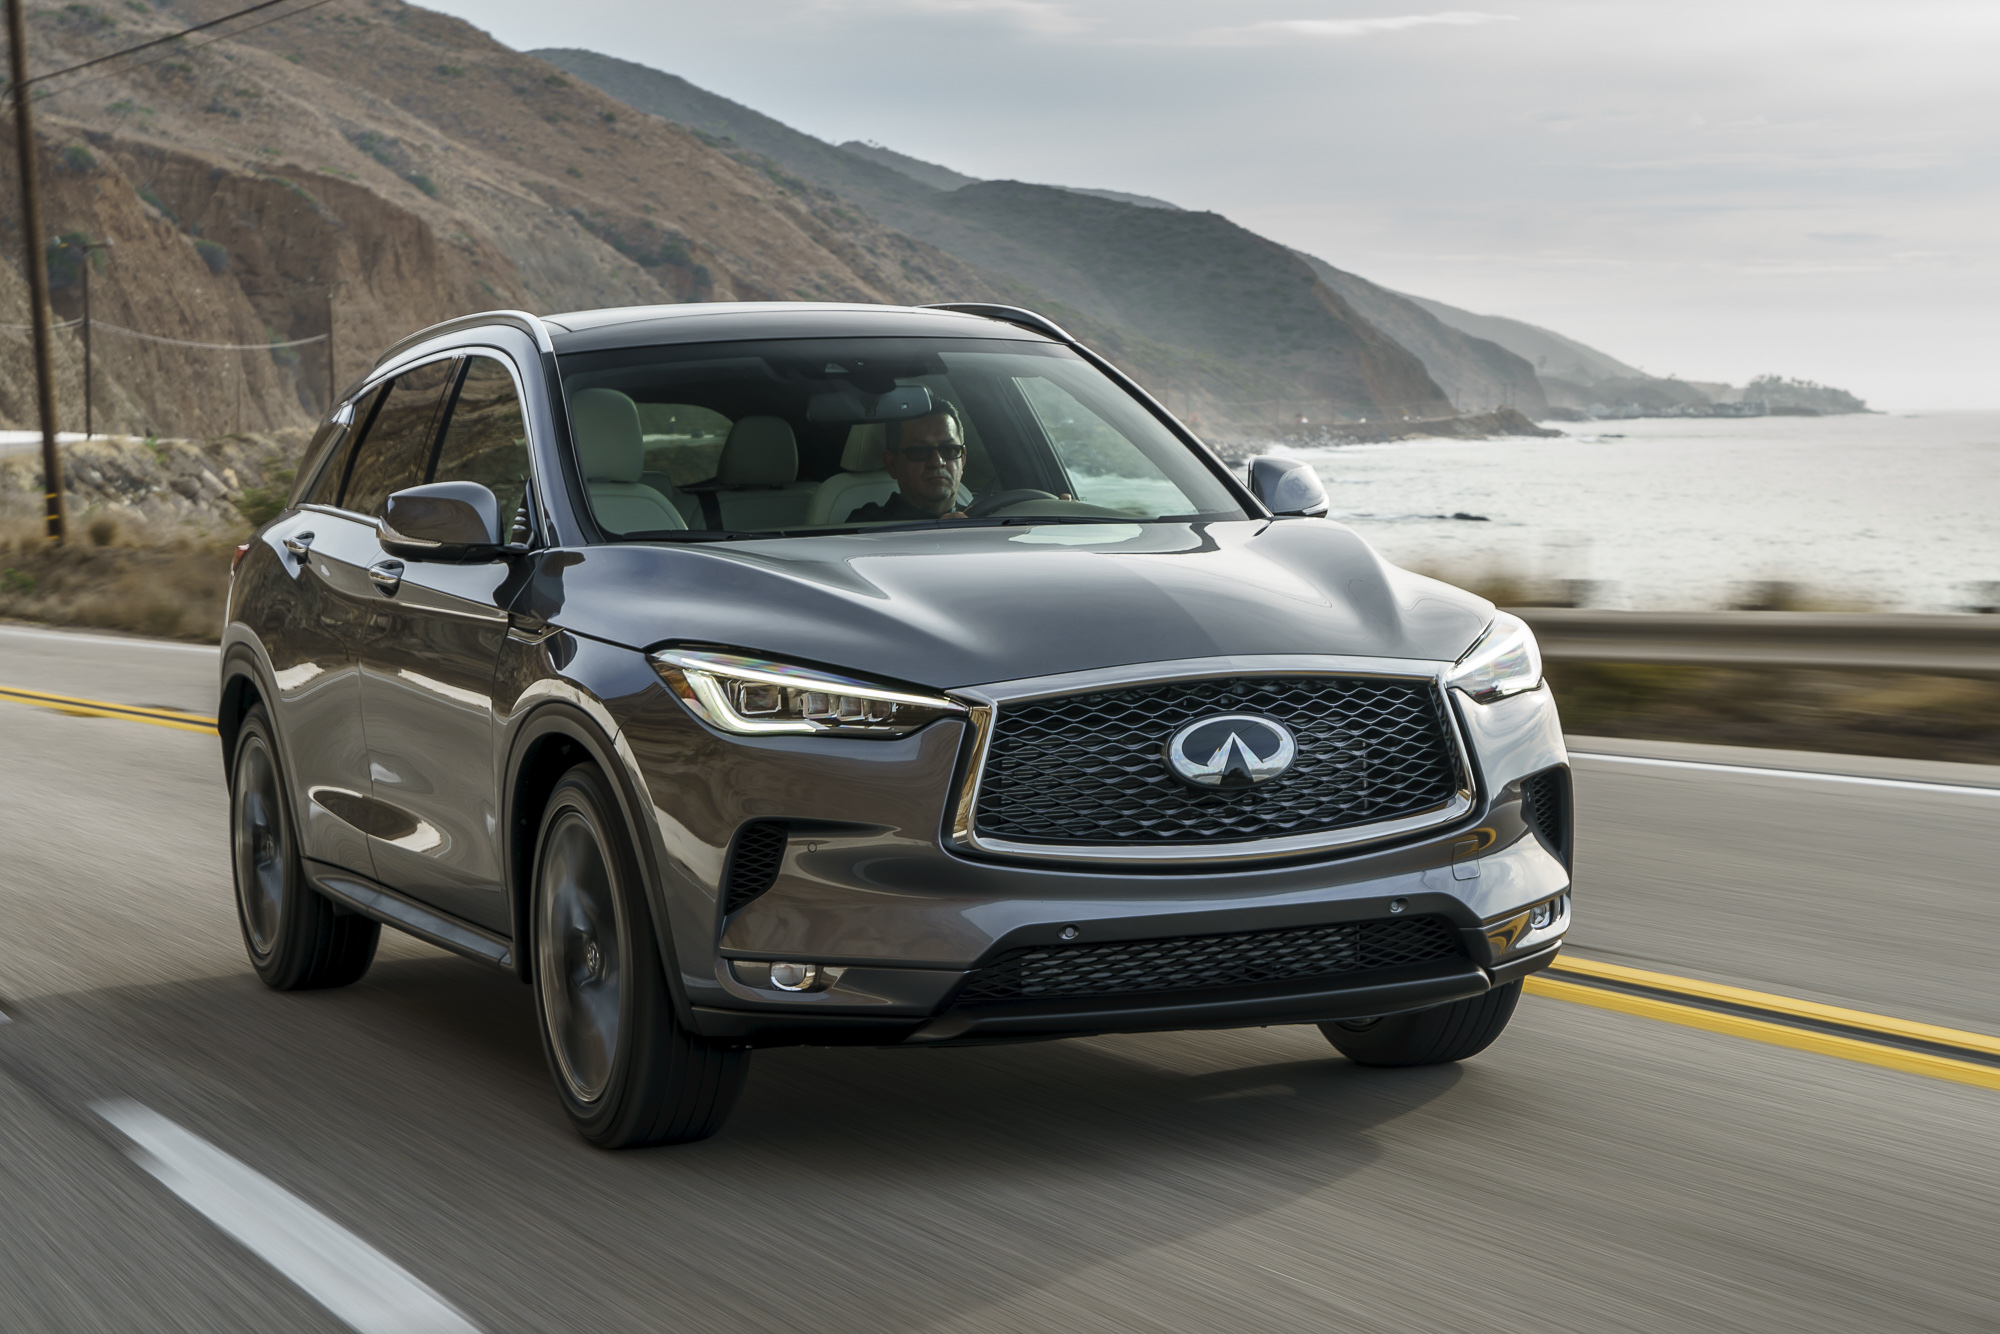 The all-new 2019 INFINITI QX50 luxury crossover made its debut this year with a combination of world-first technologies, standout design and a luxurious interior, which is why Twin Cities Auto Show has named it this year’s “Car of the Show.”